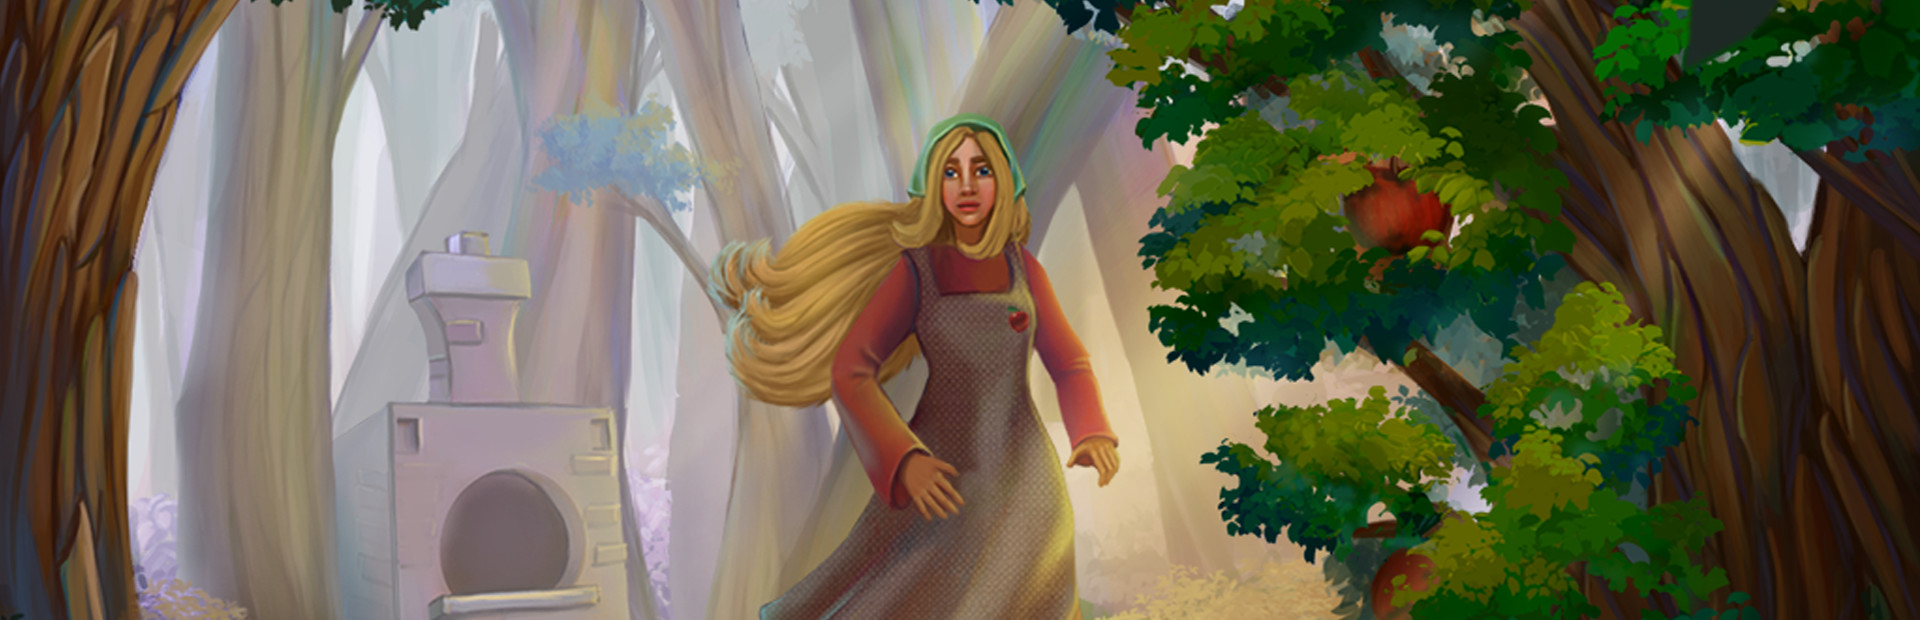 Mystery Solitaire Grimm's Tales 3 cover image